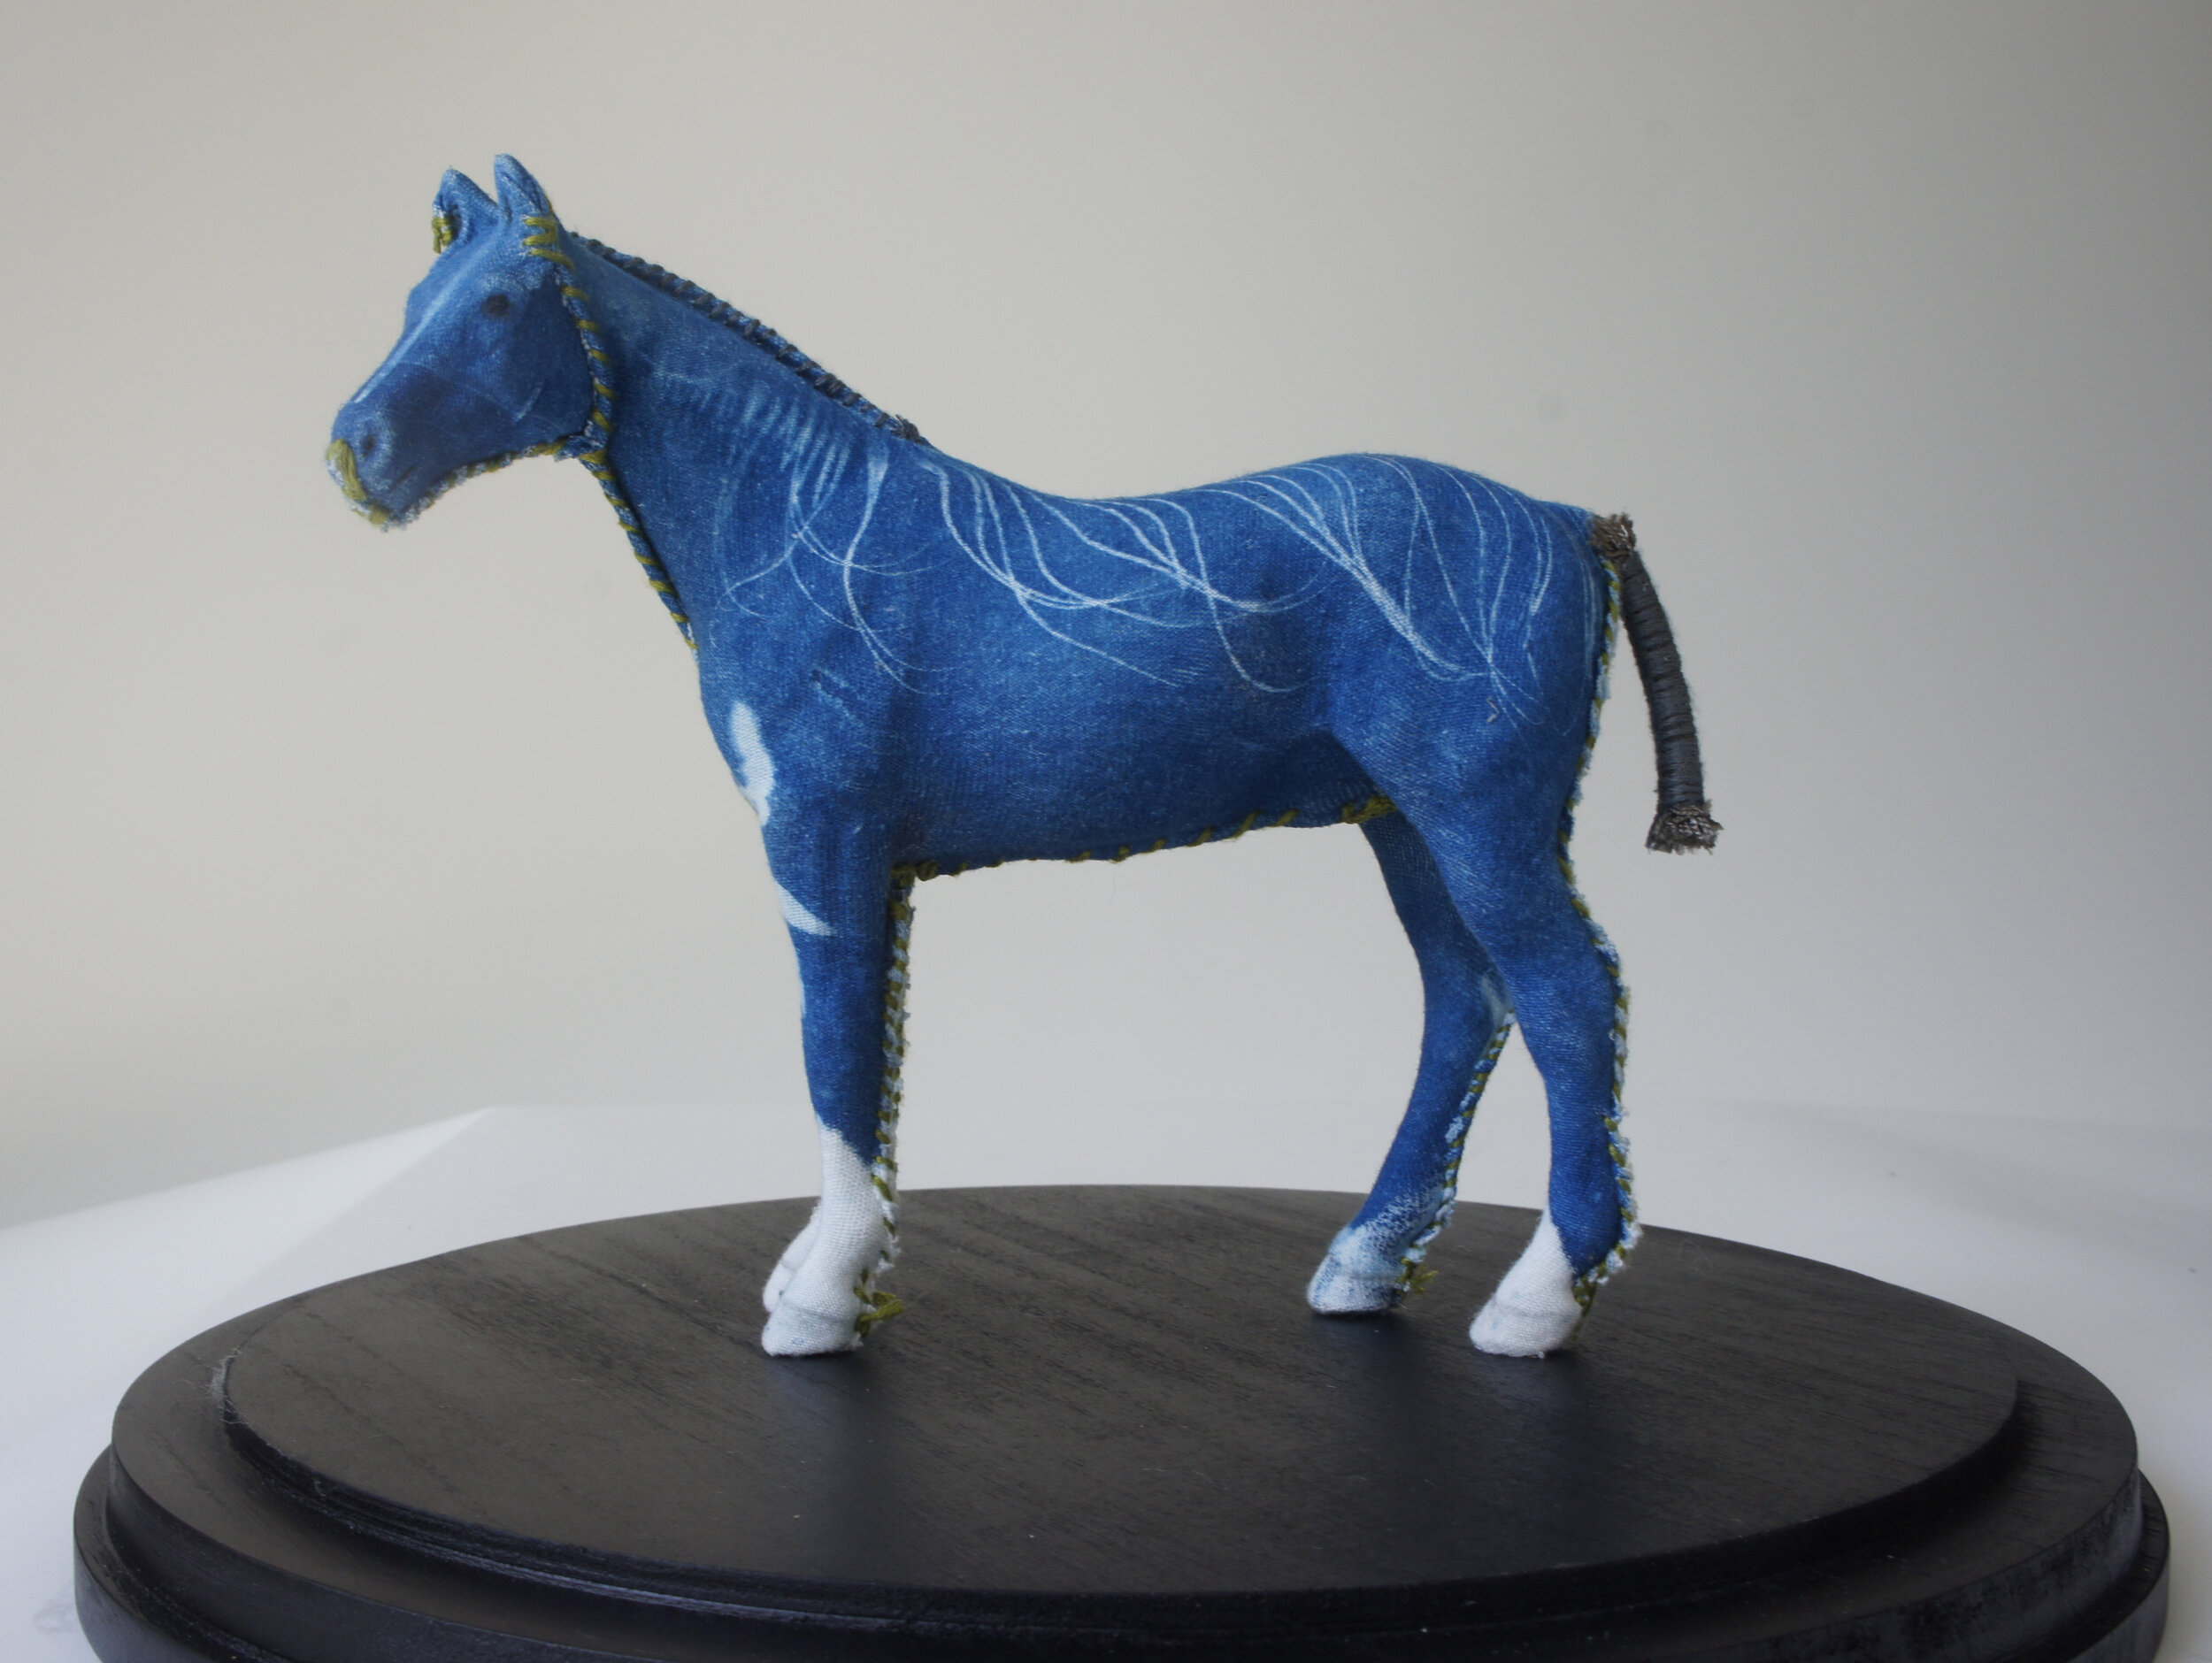  Gin Stone,  Cyanotype Spinal Feather Miniature Horse , Mixed media, 13 x 13 x 13 